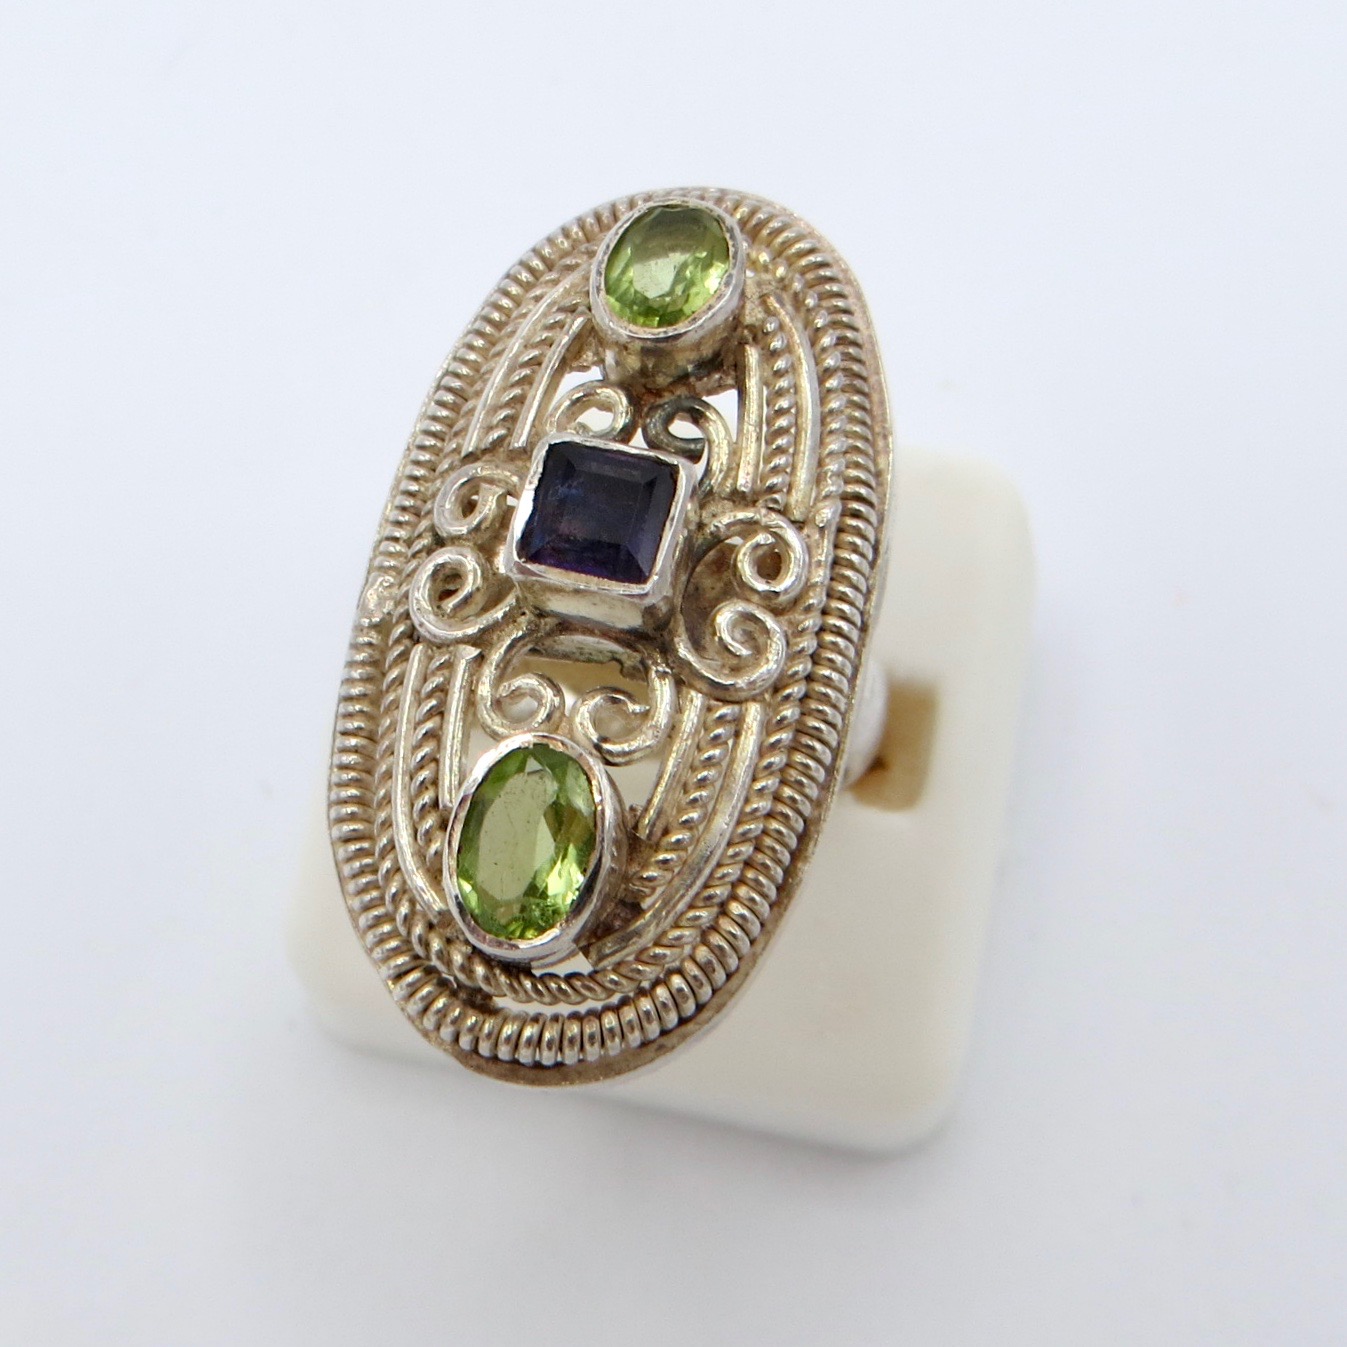 Sterling Silver Filigree Ring with Peridot and Iolite